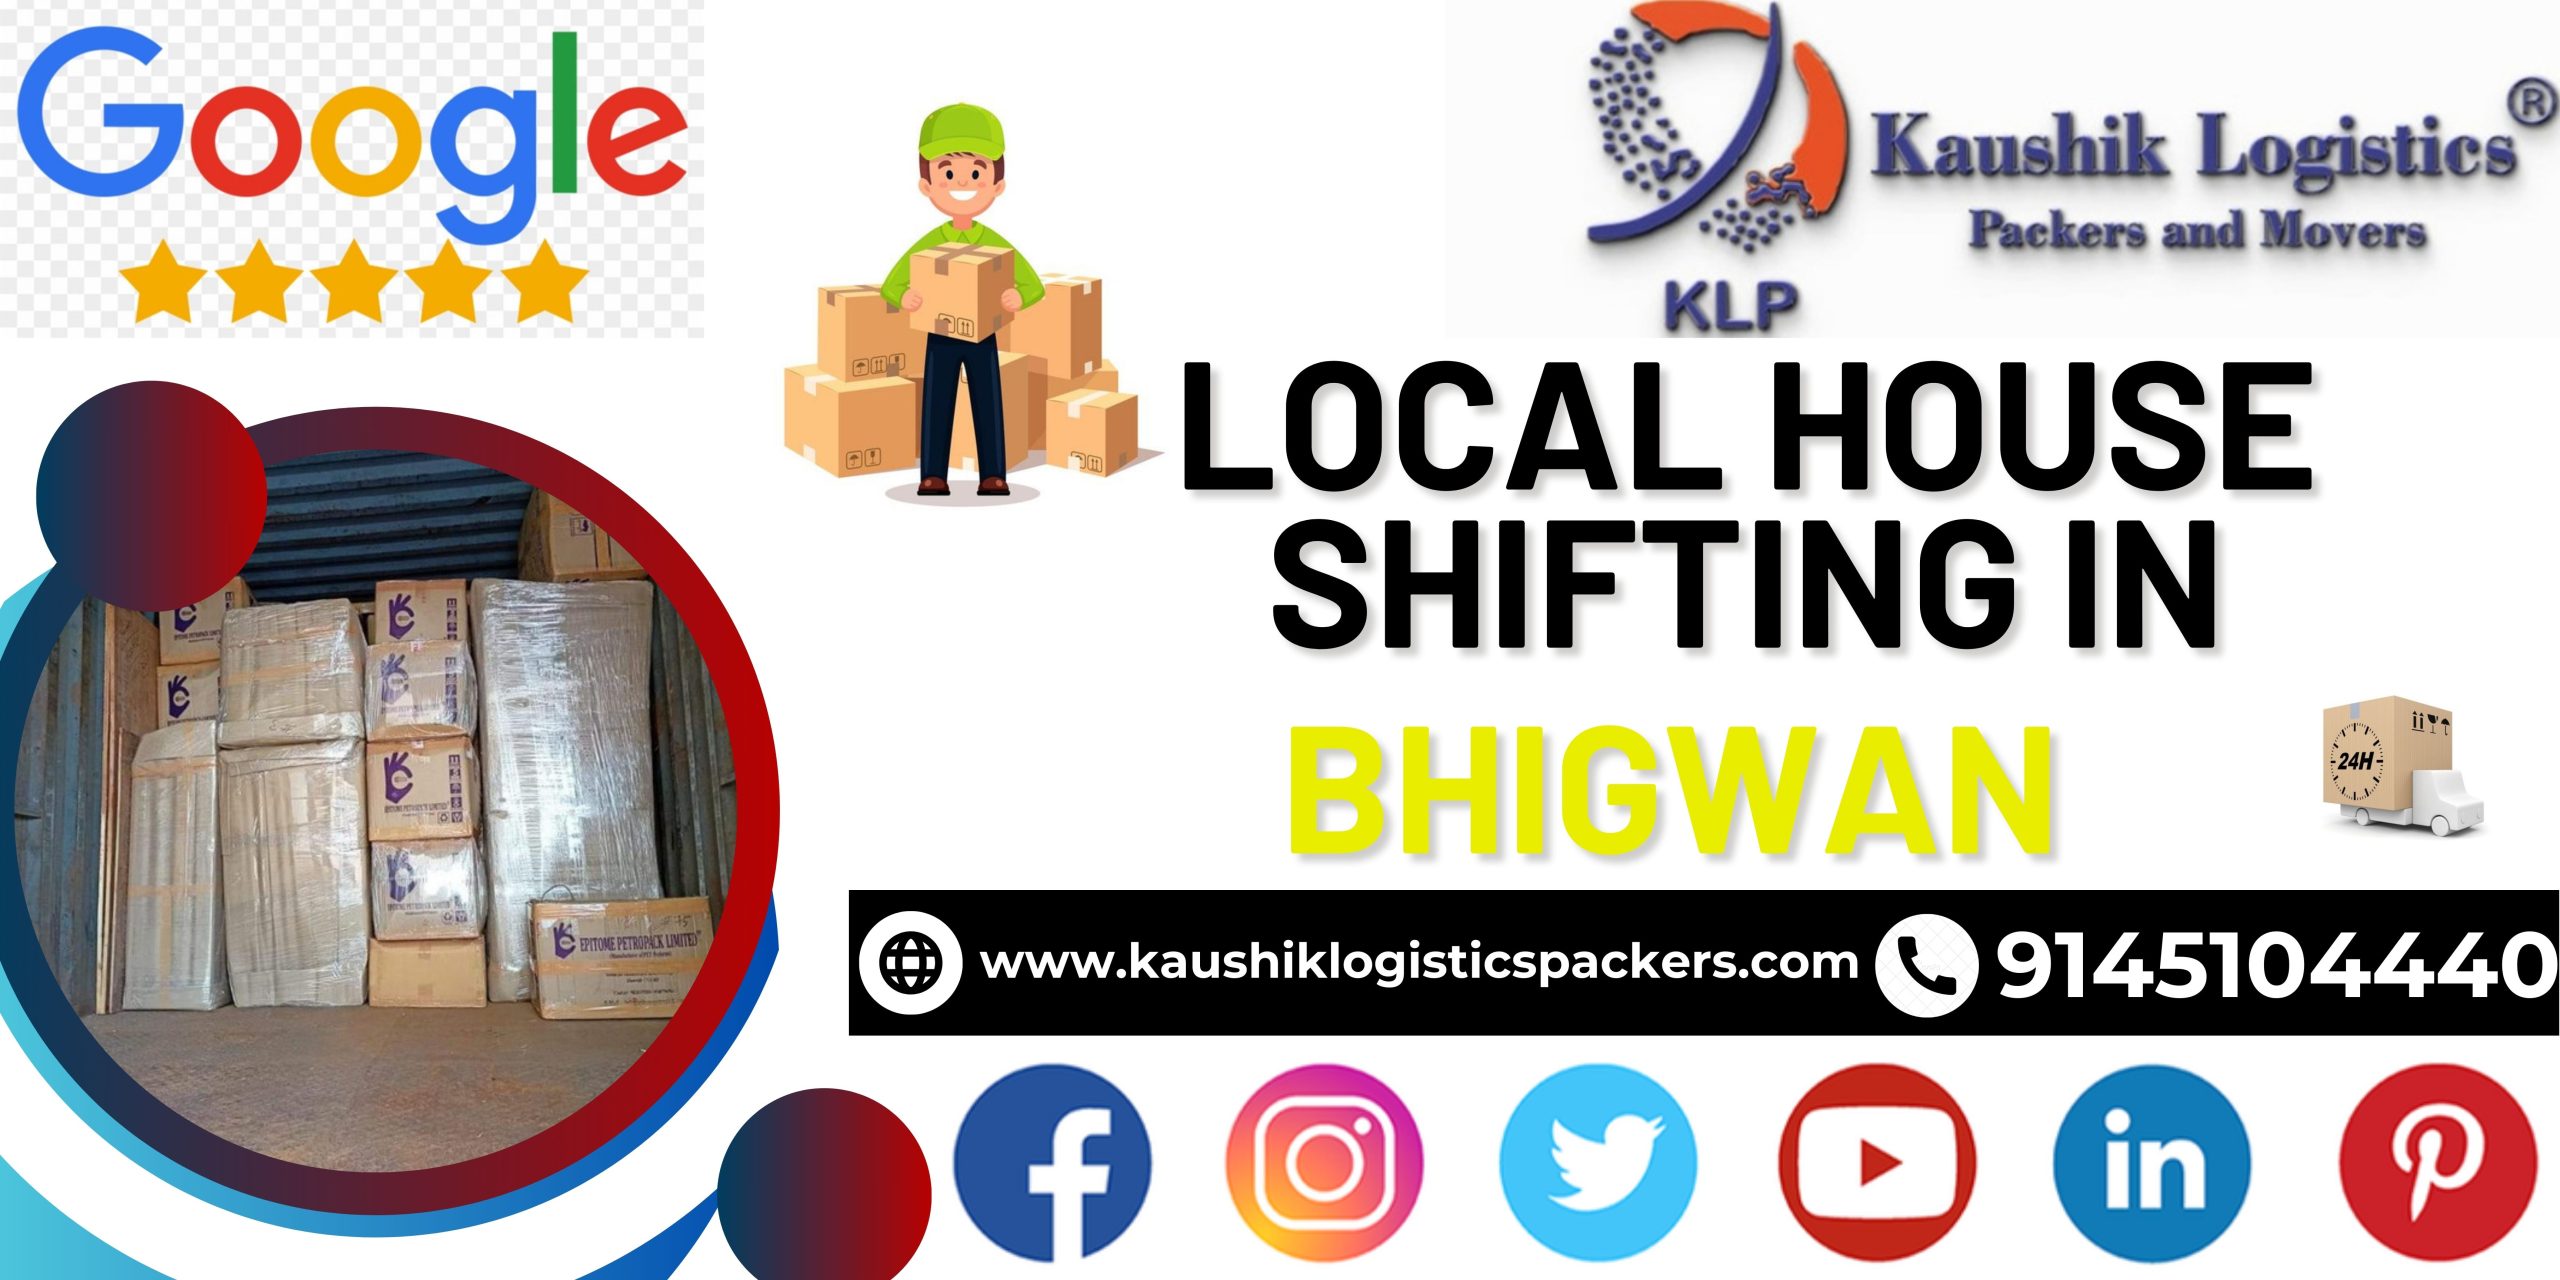 Packers and Movers In Bhigwan